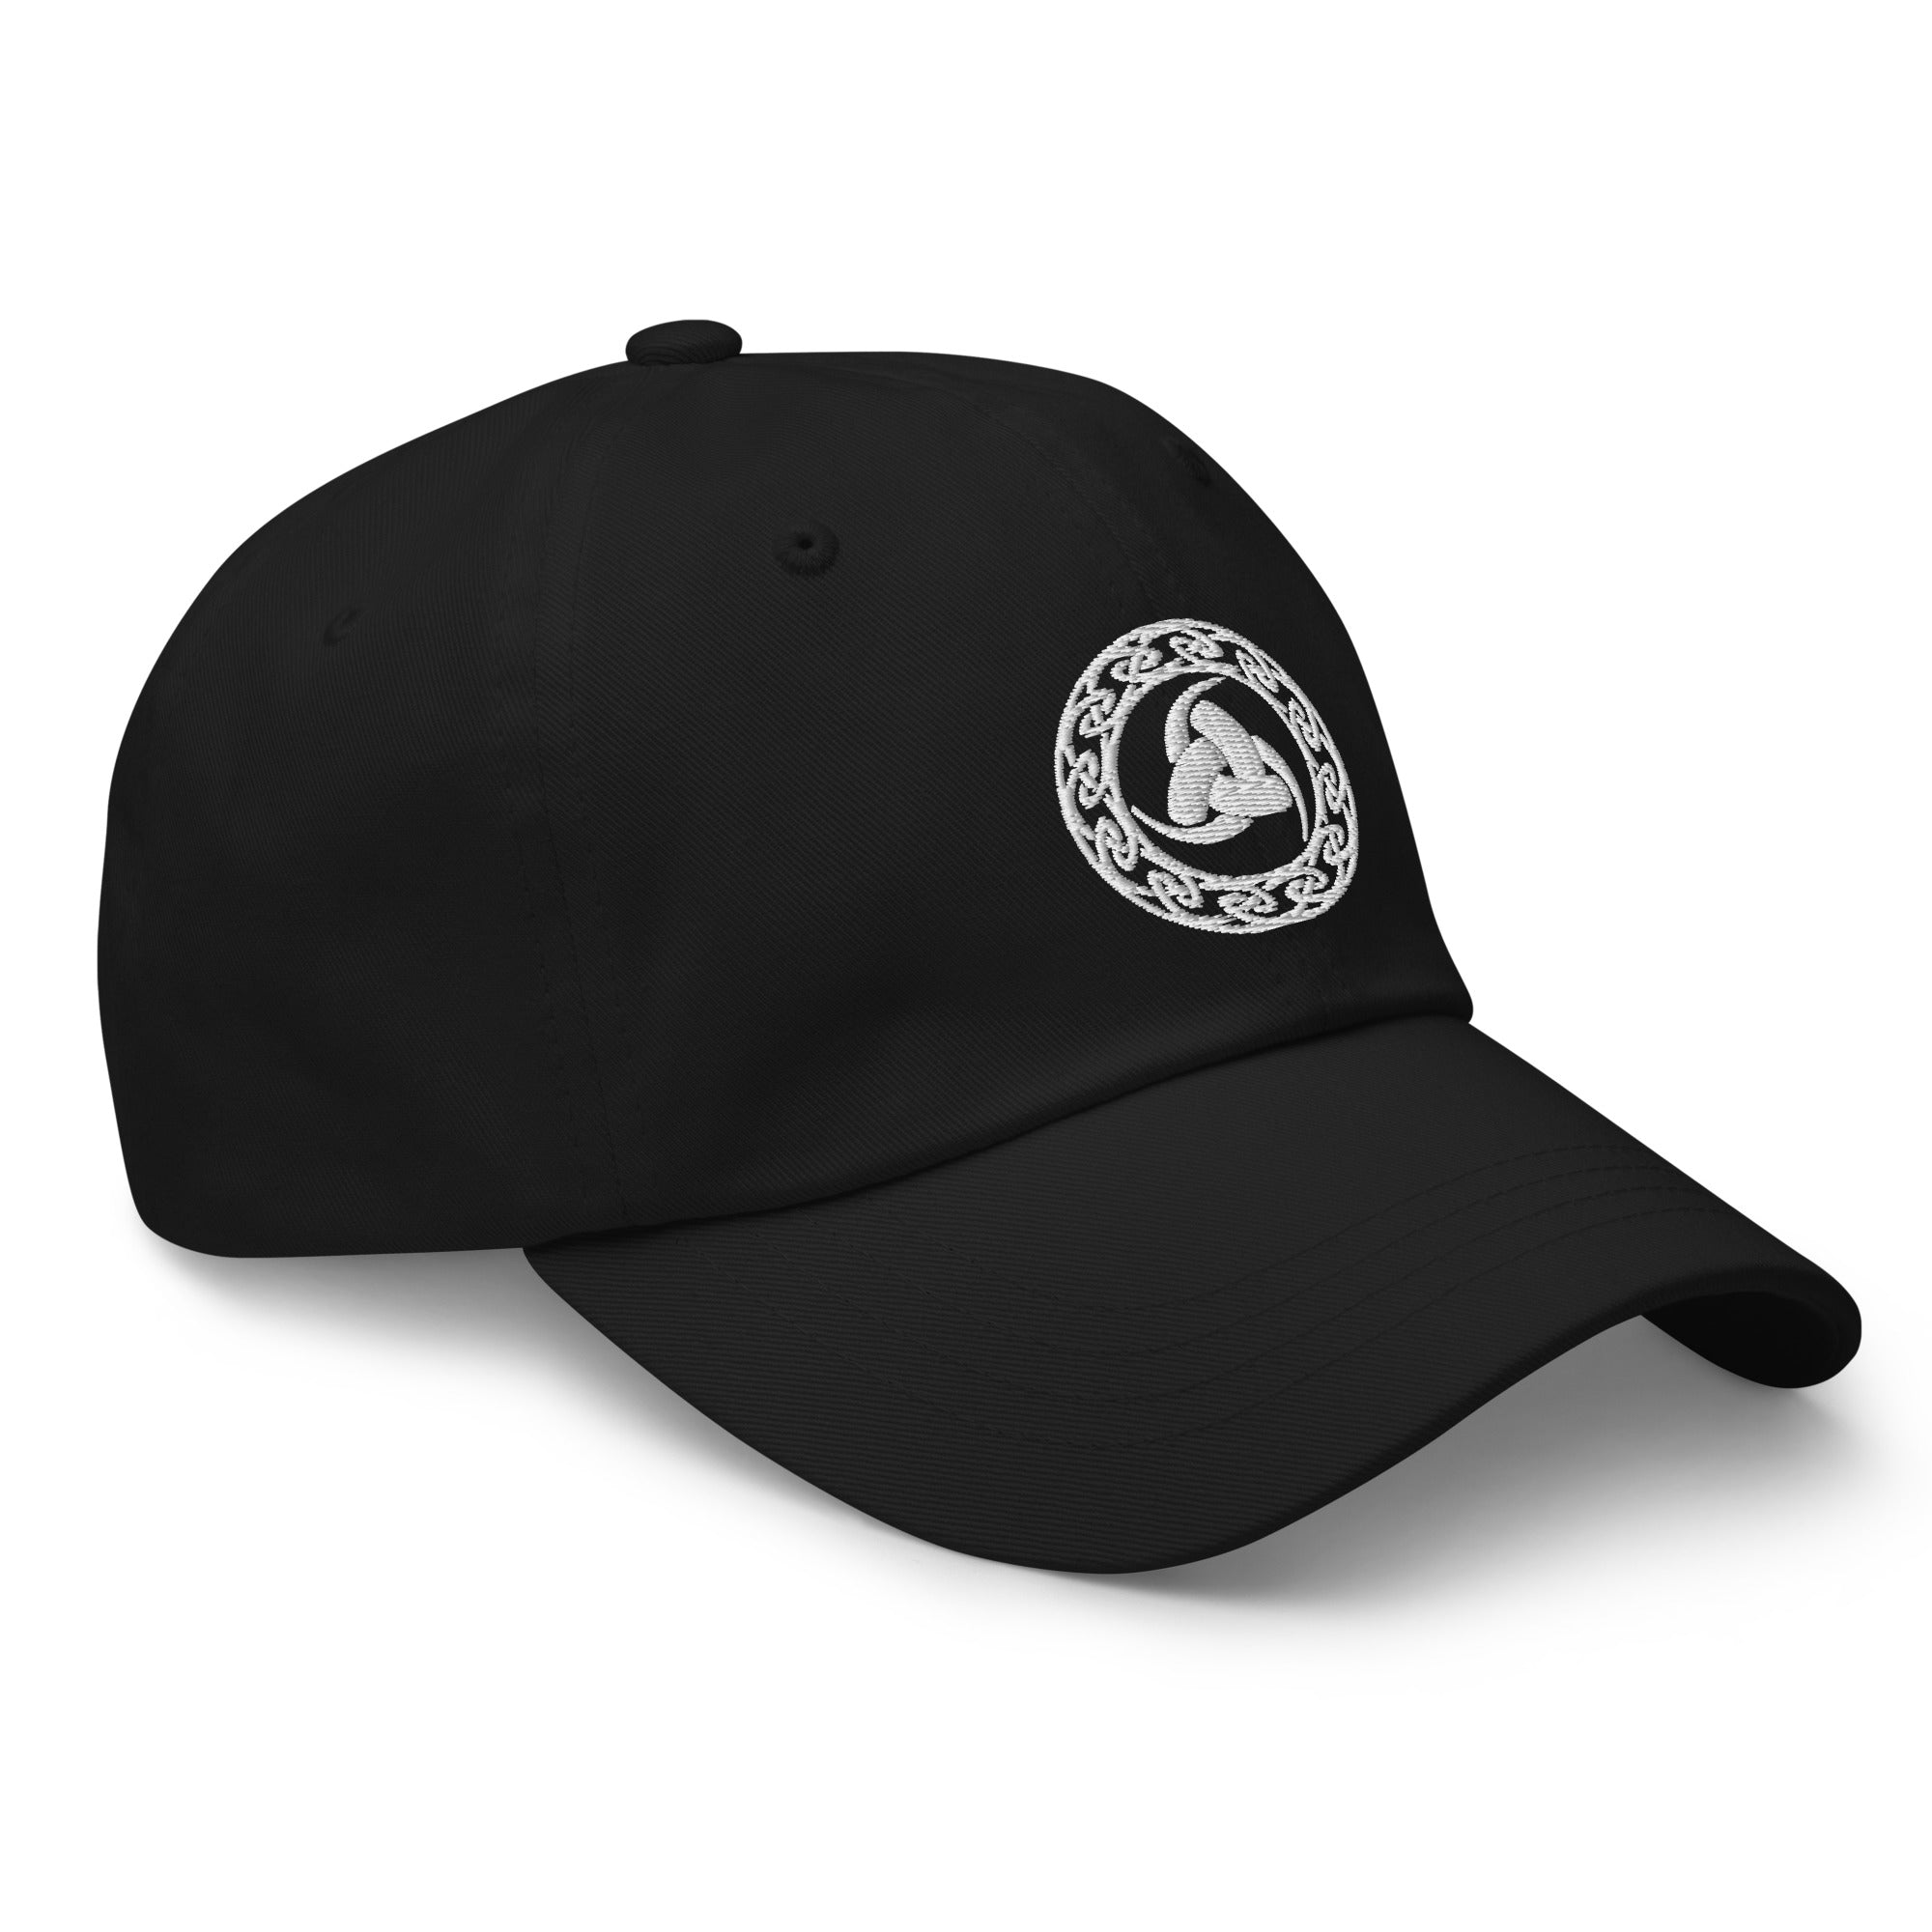 Odin's Knot - The Valknut Embroidered Baseball Cap Celtic Knots Dad hat - Edge of Life Designs